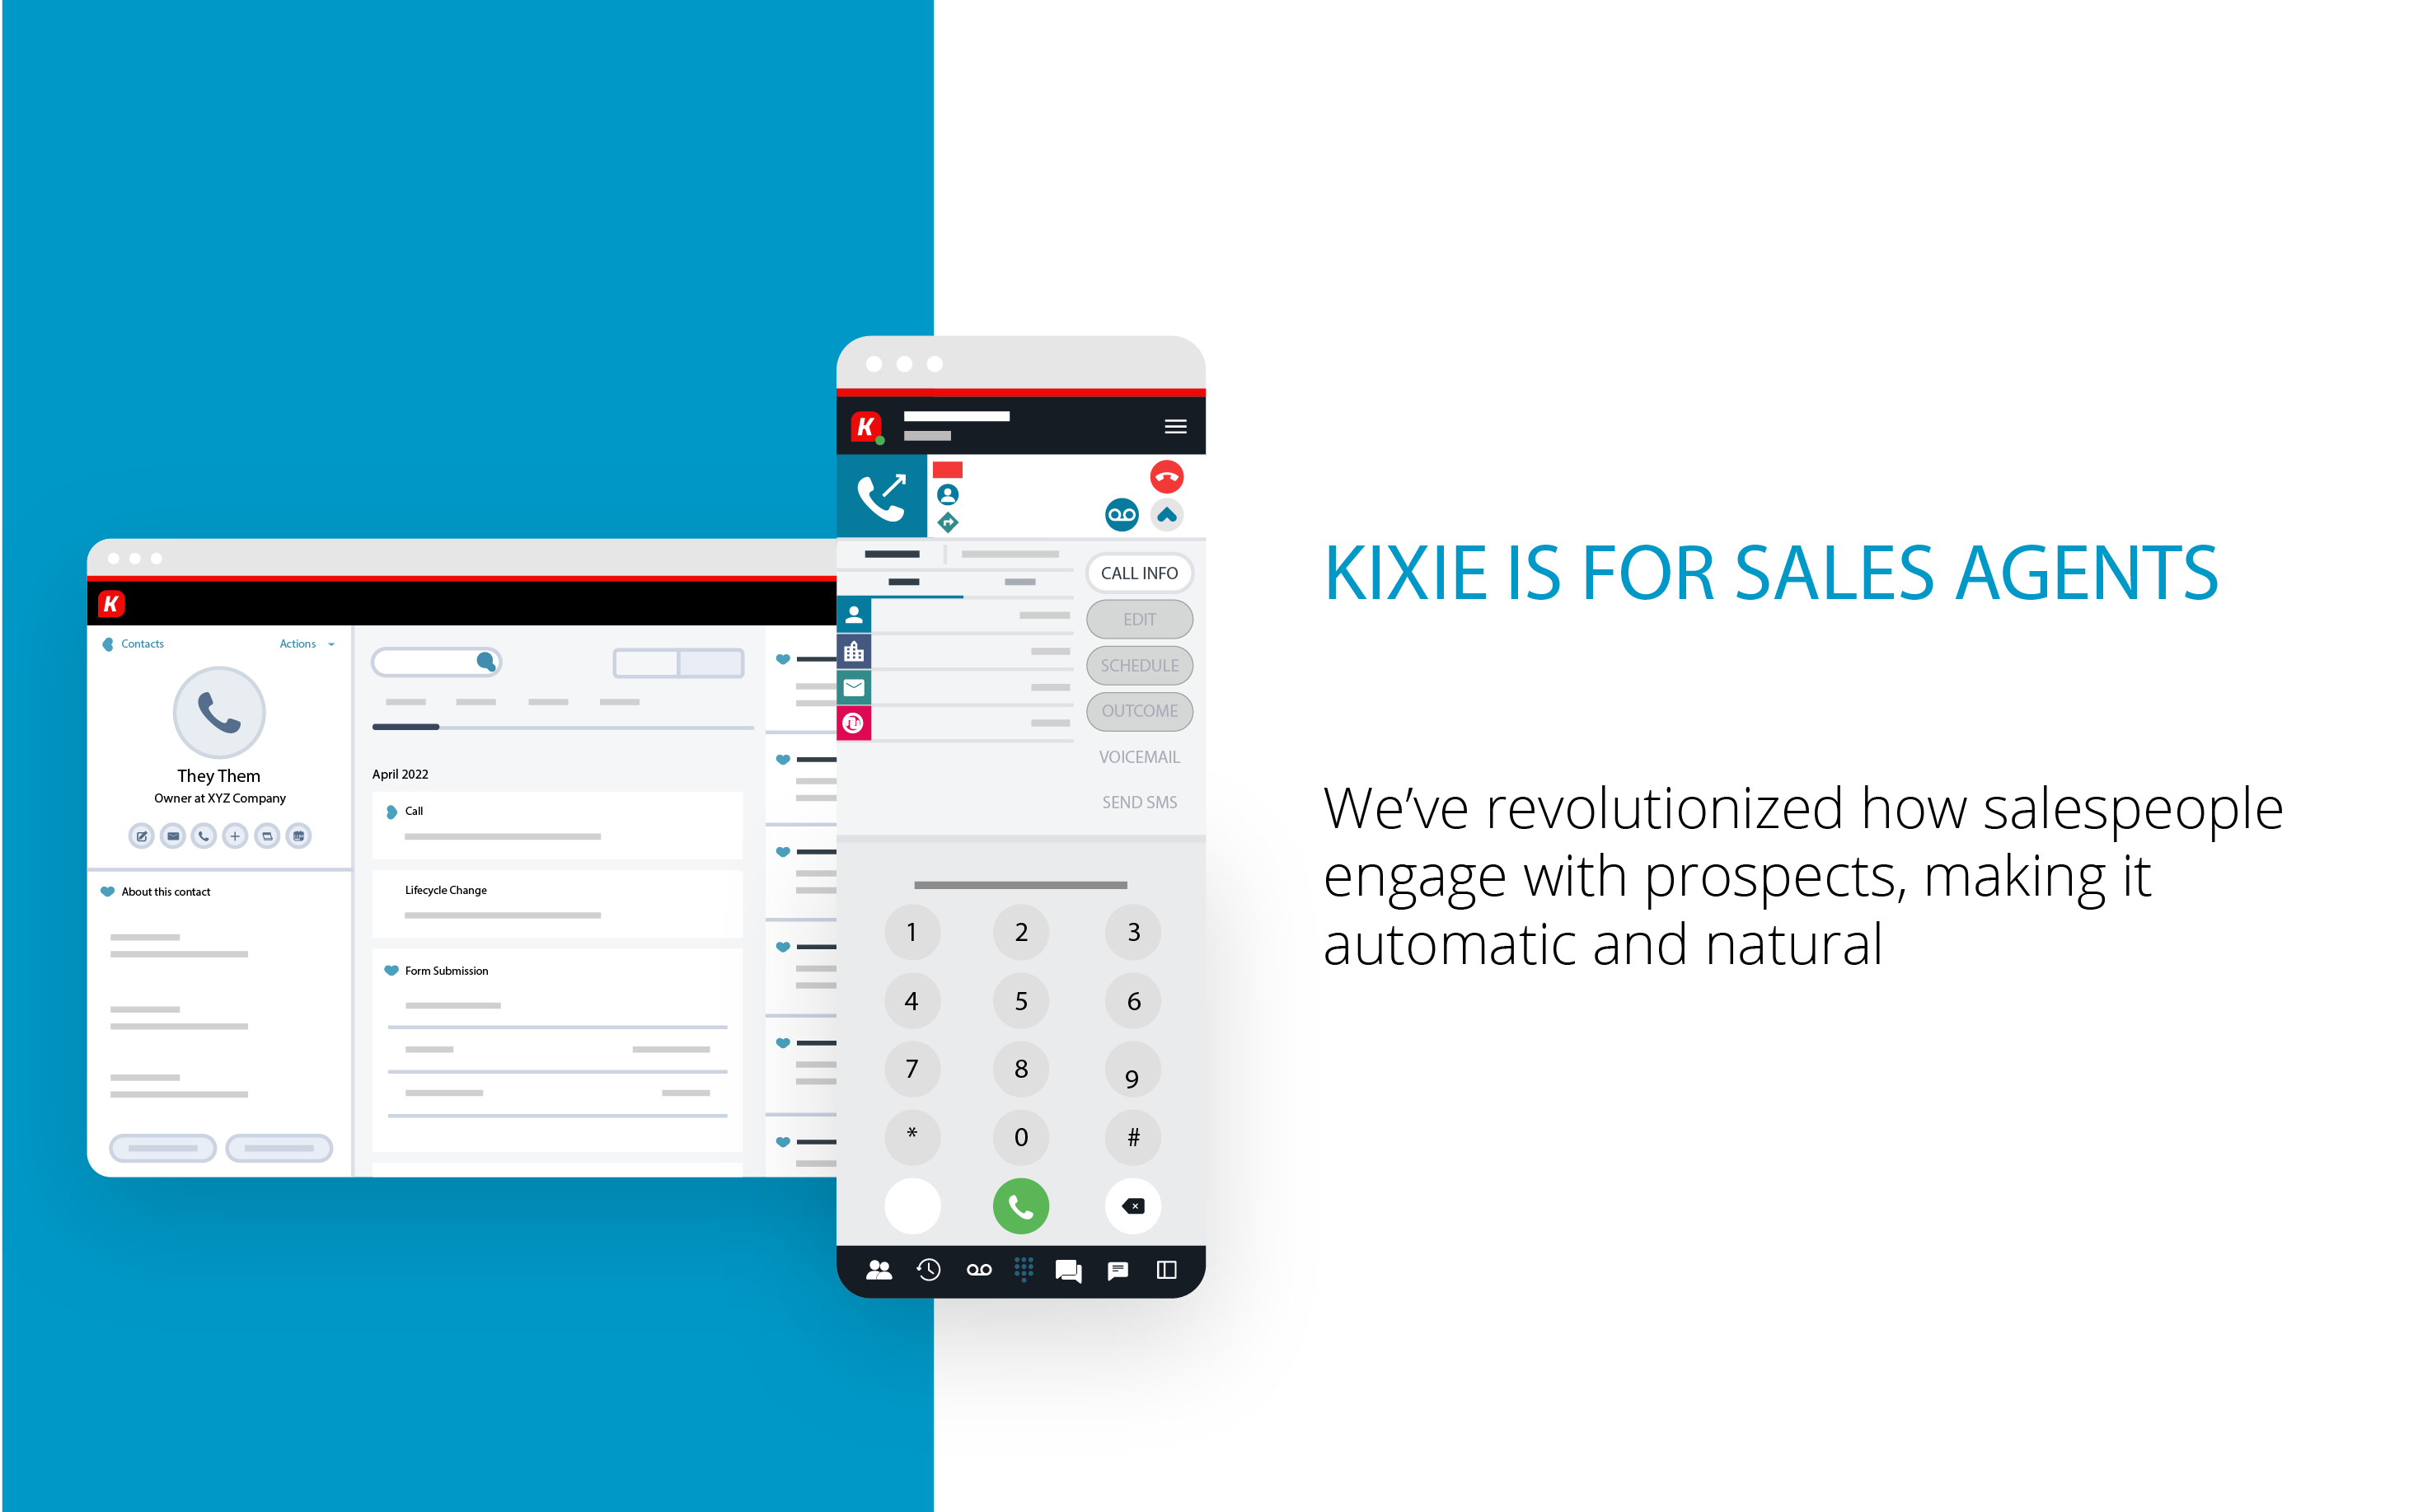 Kixie PowerCall Software - Built specifically for modern sales teams.